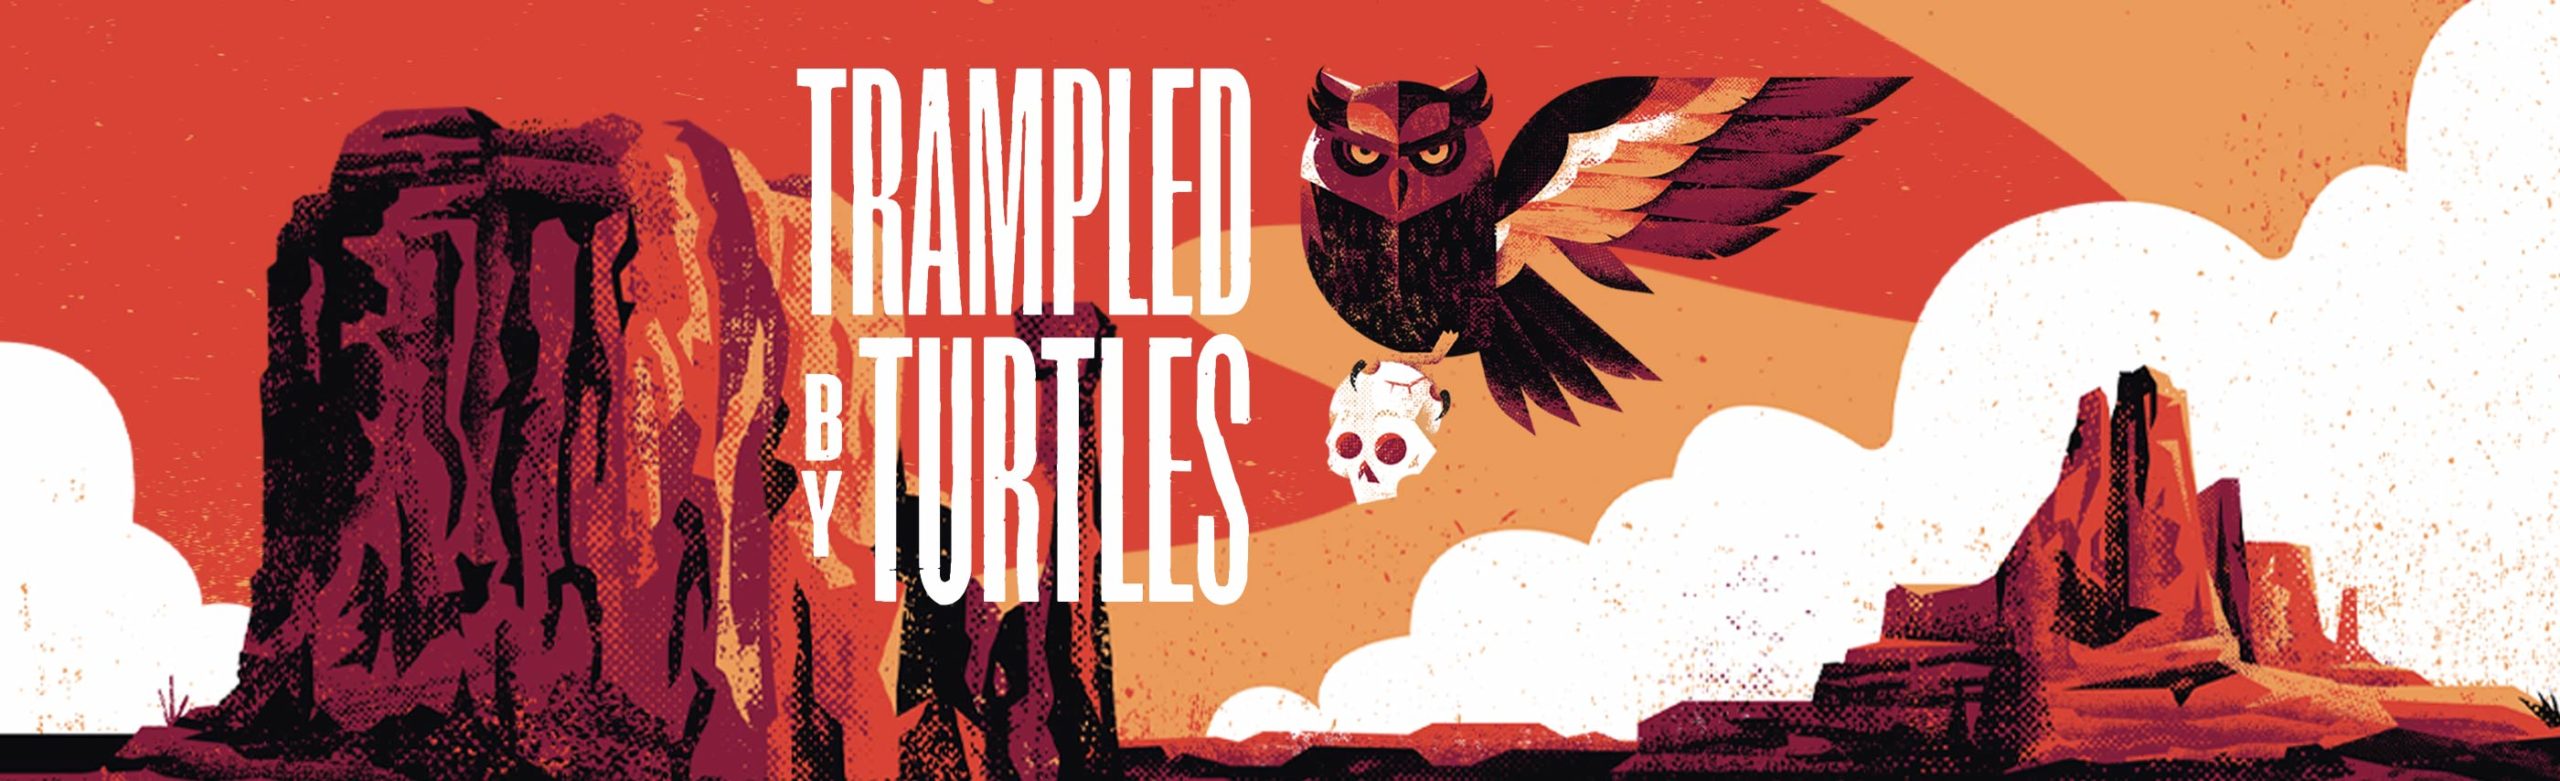 Trampled by Turtles Confirm Concerts at The ELM and KettleHouse Amphitheater in 2023 Image